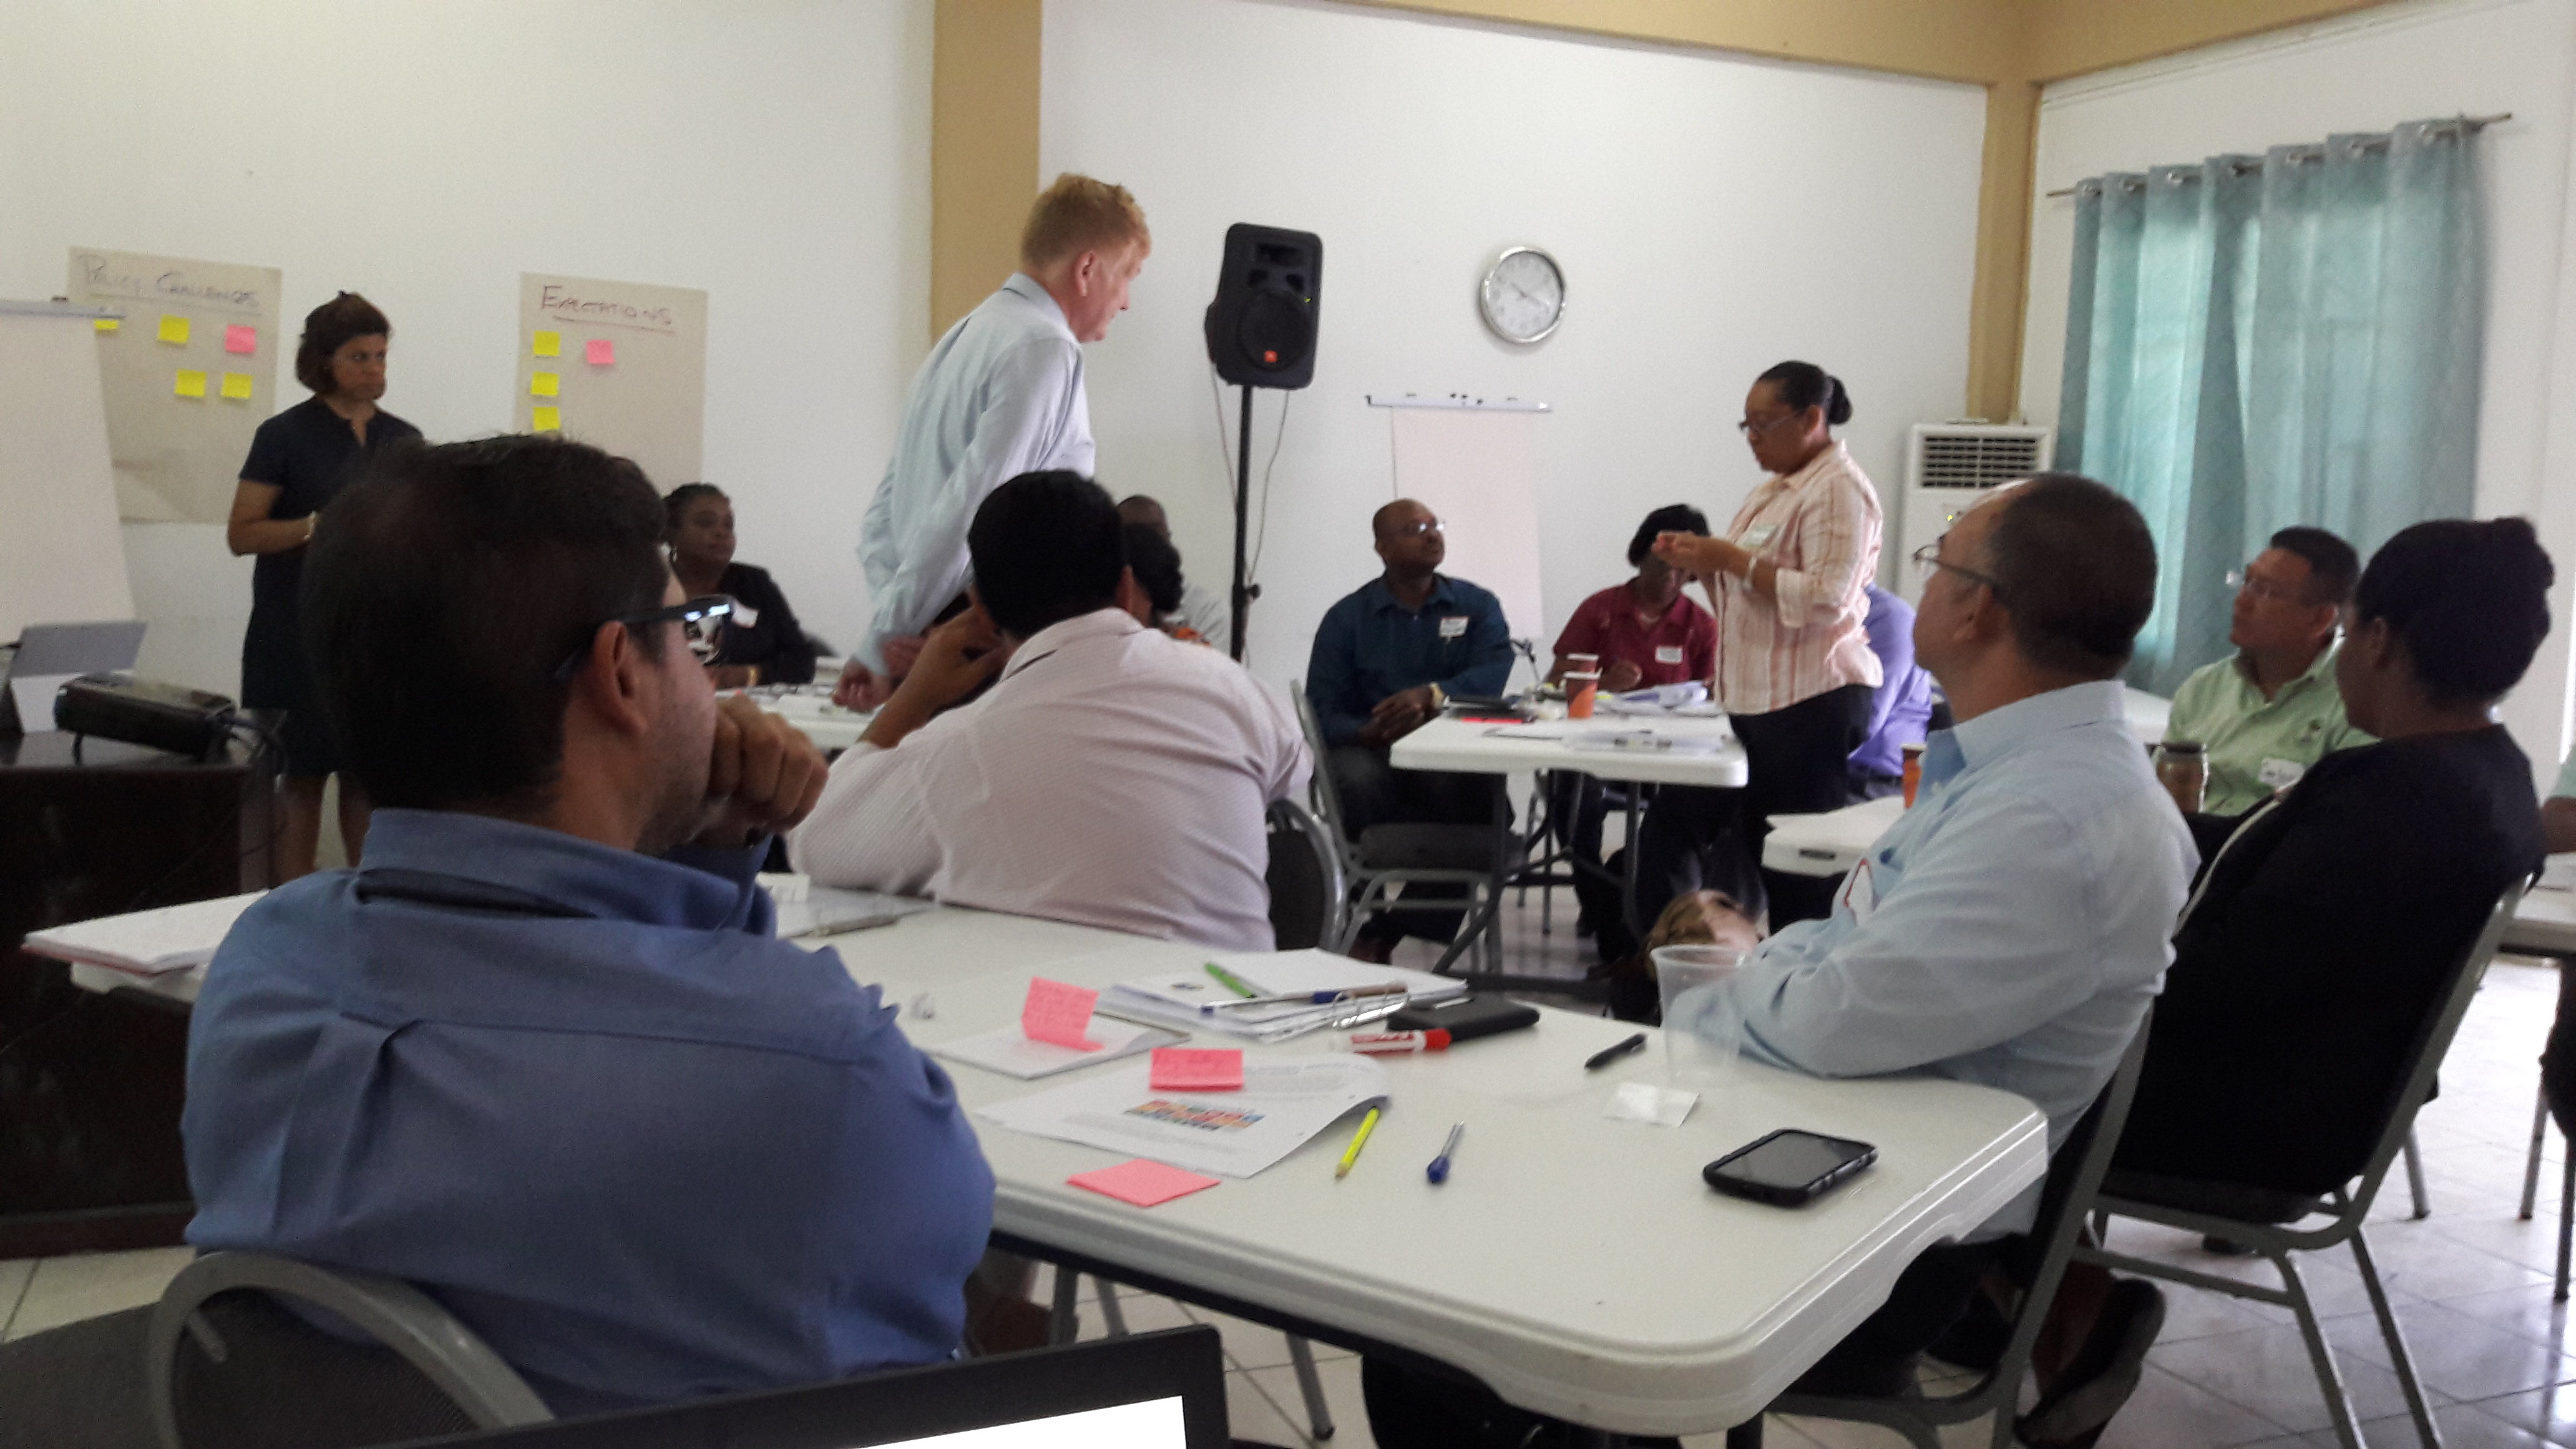 Public service officials participate in a training session on day one of the PPAM/PCM training in Belize.